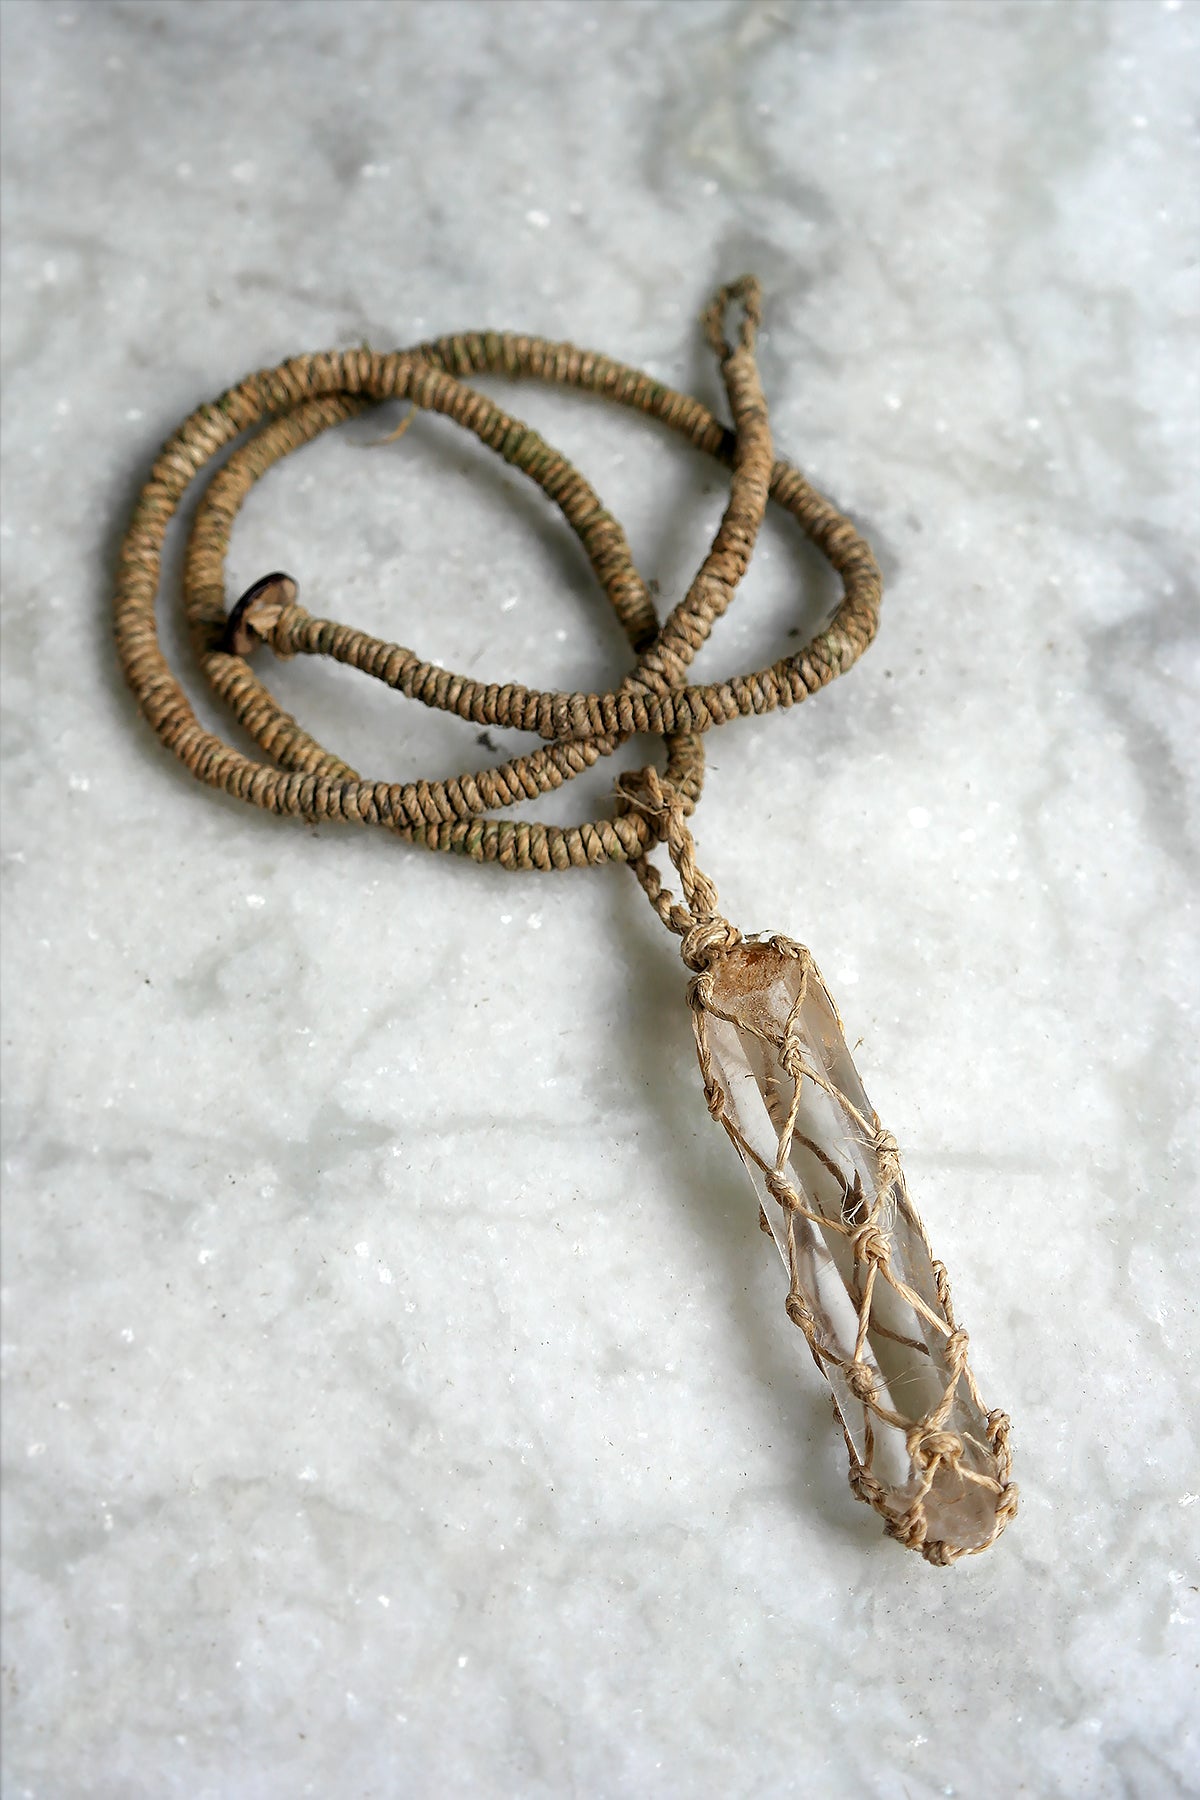 Crystal Stone Pendant Necklace with Hemp Cord